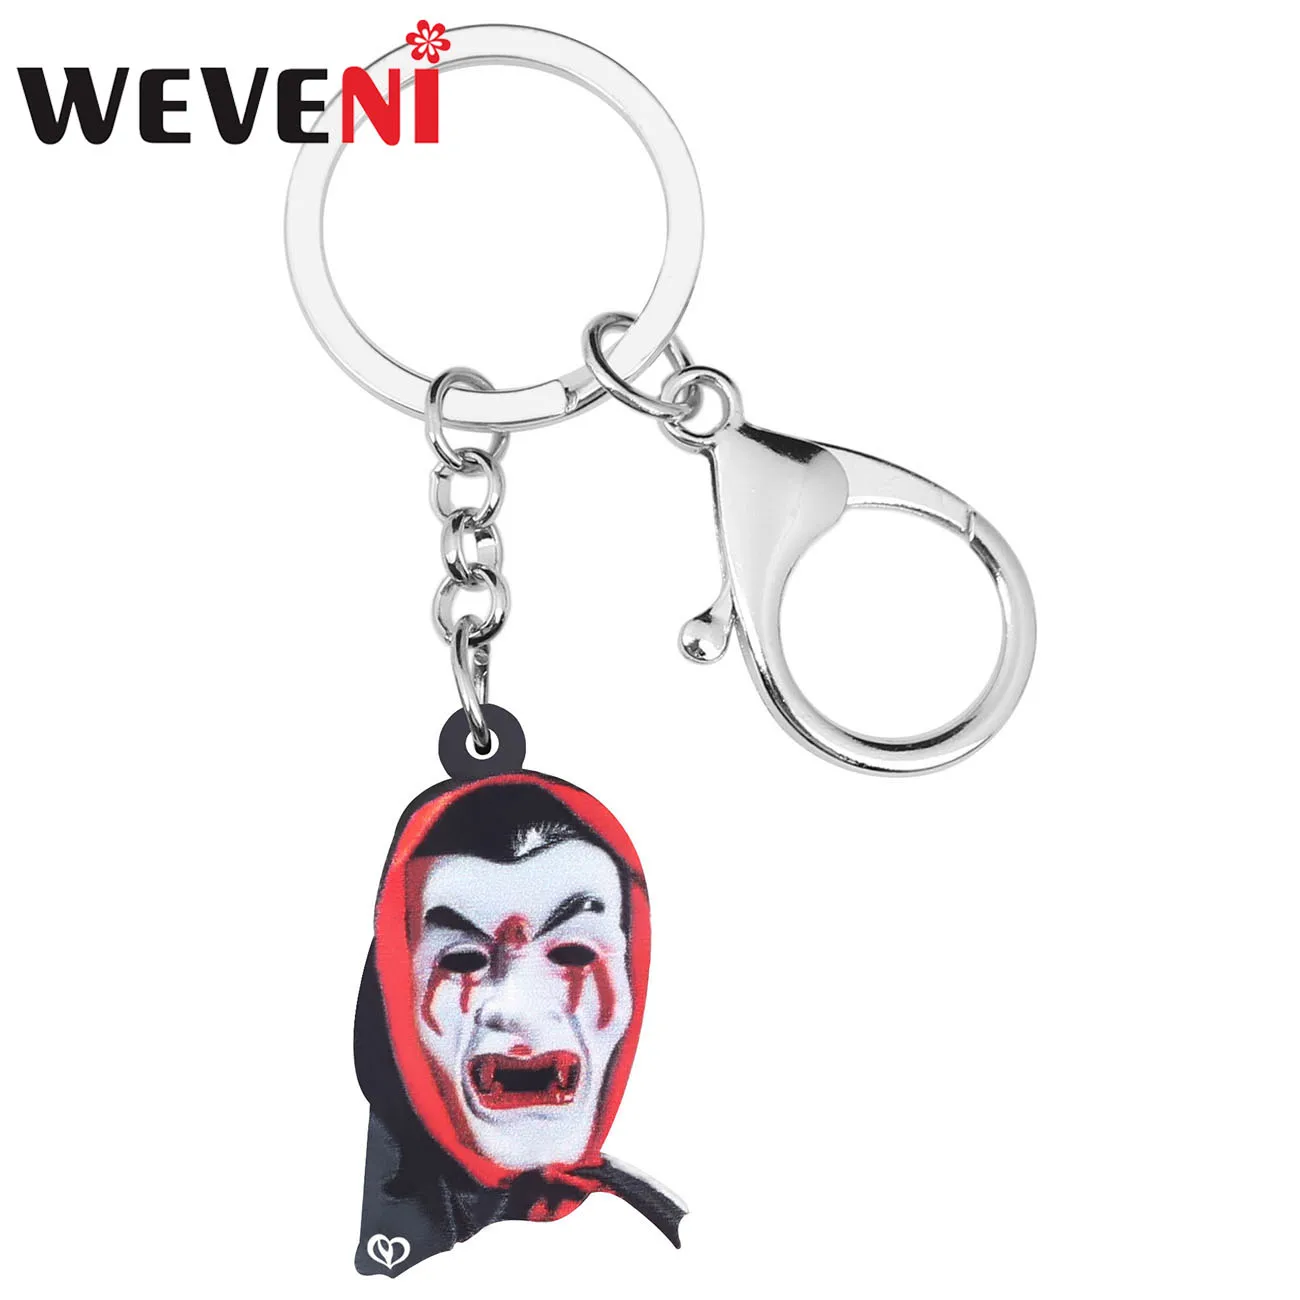 

WEVENI Acrylic Halloween Evil Grimace Keychains Keyring Long Frightening Wristlet Key Chain Jewelry For Women Kid Gift Accessory